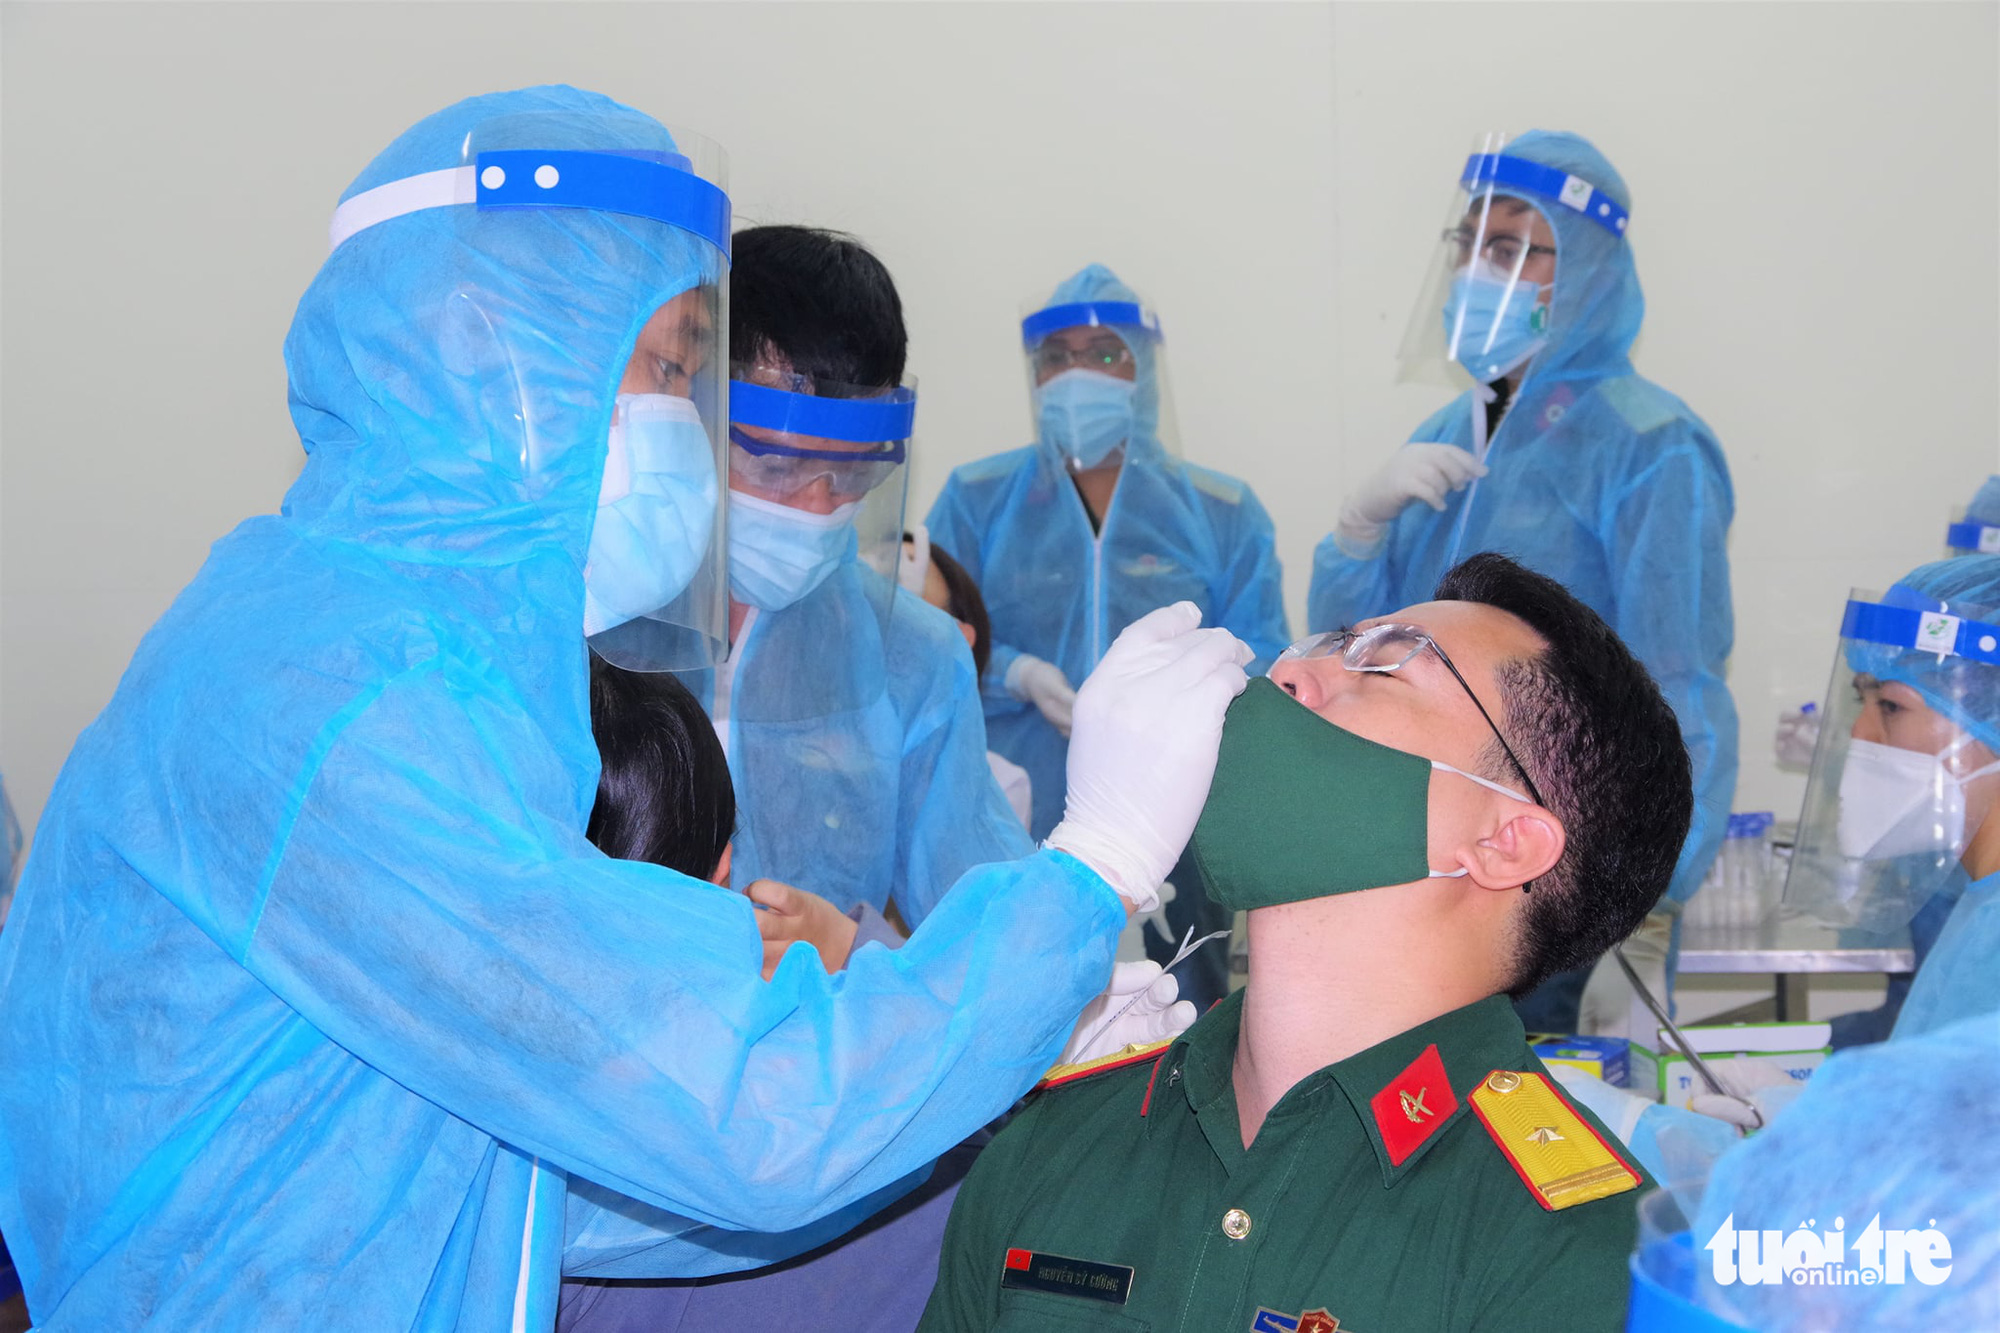 A health worker is being tested for COVID-19 at 175 Military Hospital in Go Vap District, Ho Chi Minh City, February 8, 2021. Photo: Tran Chinh / Tuoi Tre